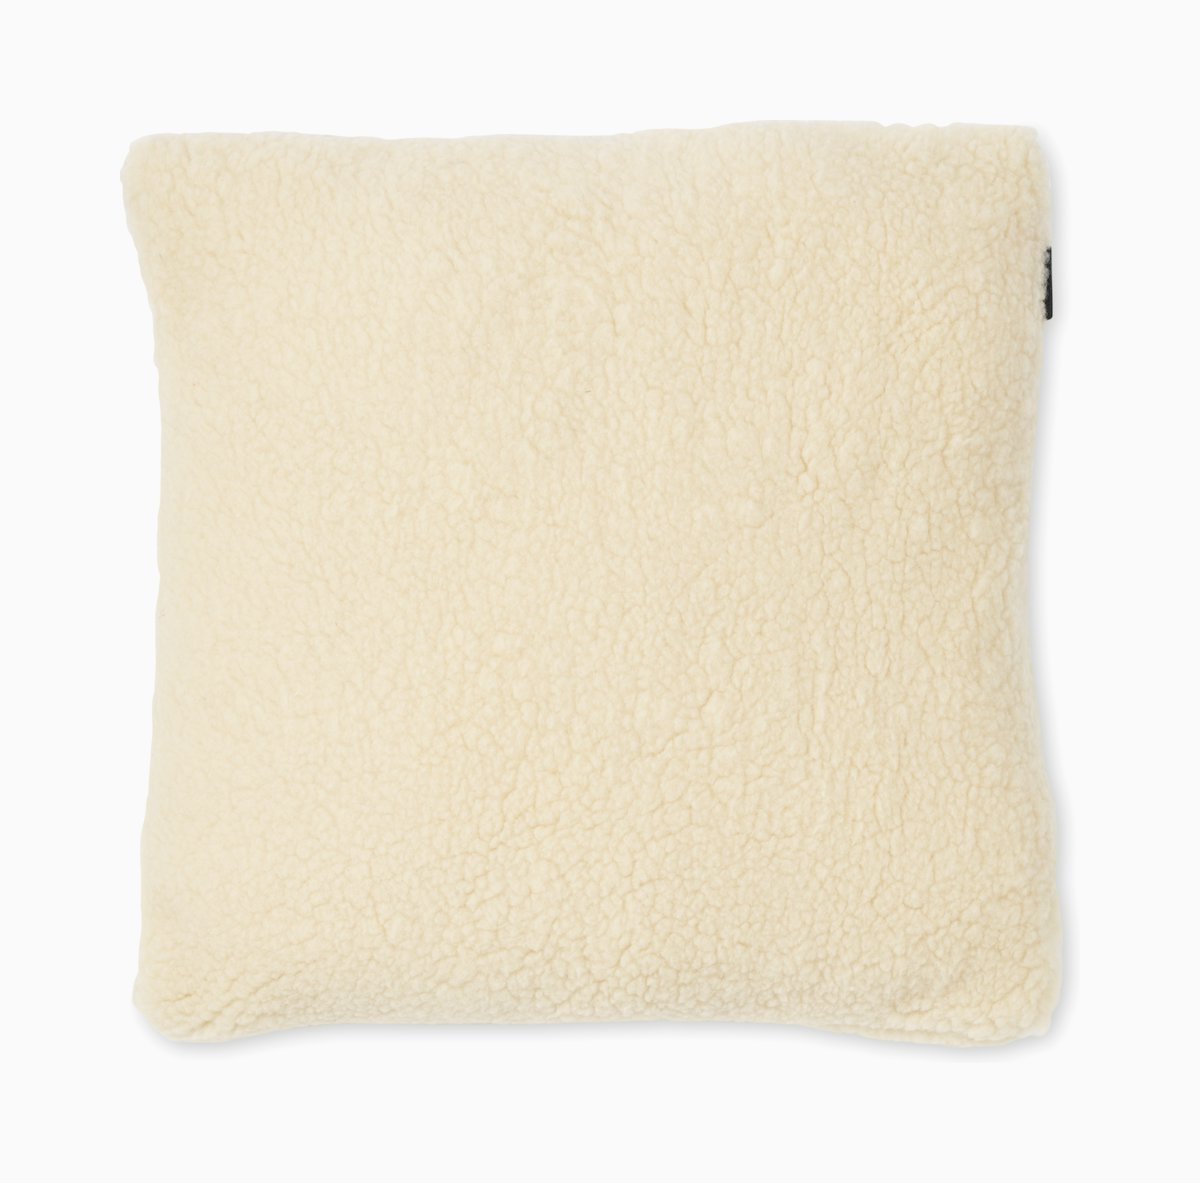 Pasture Throw Pillow by Paul Smith